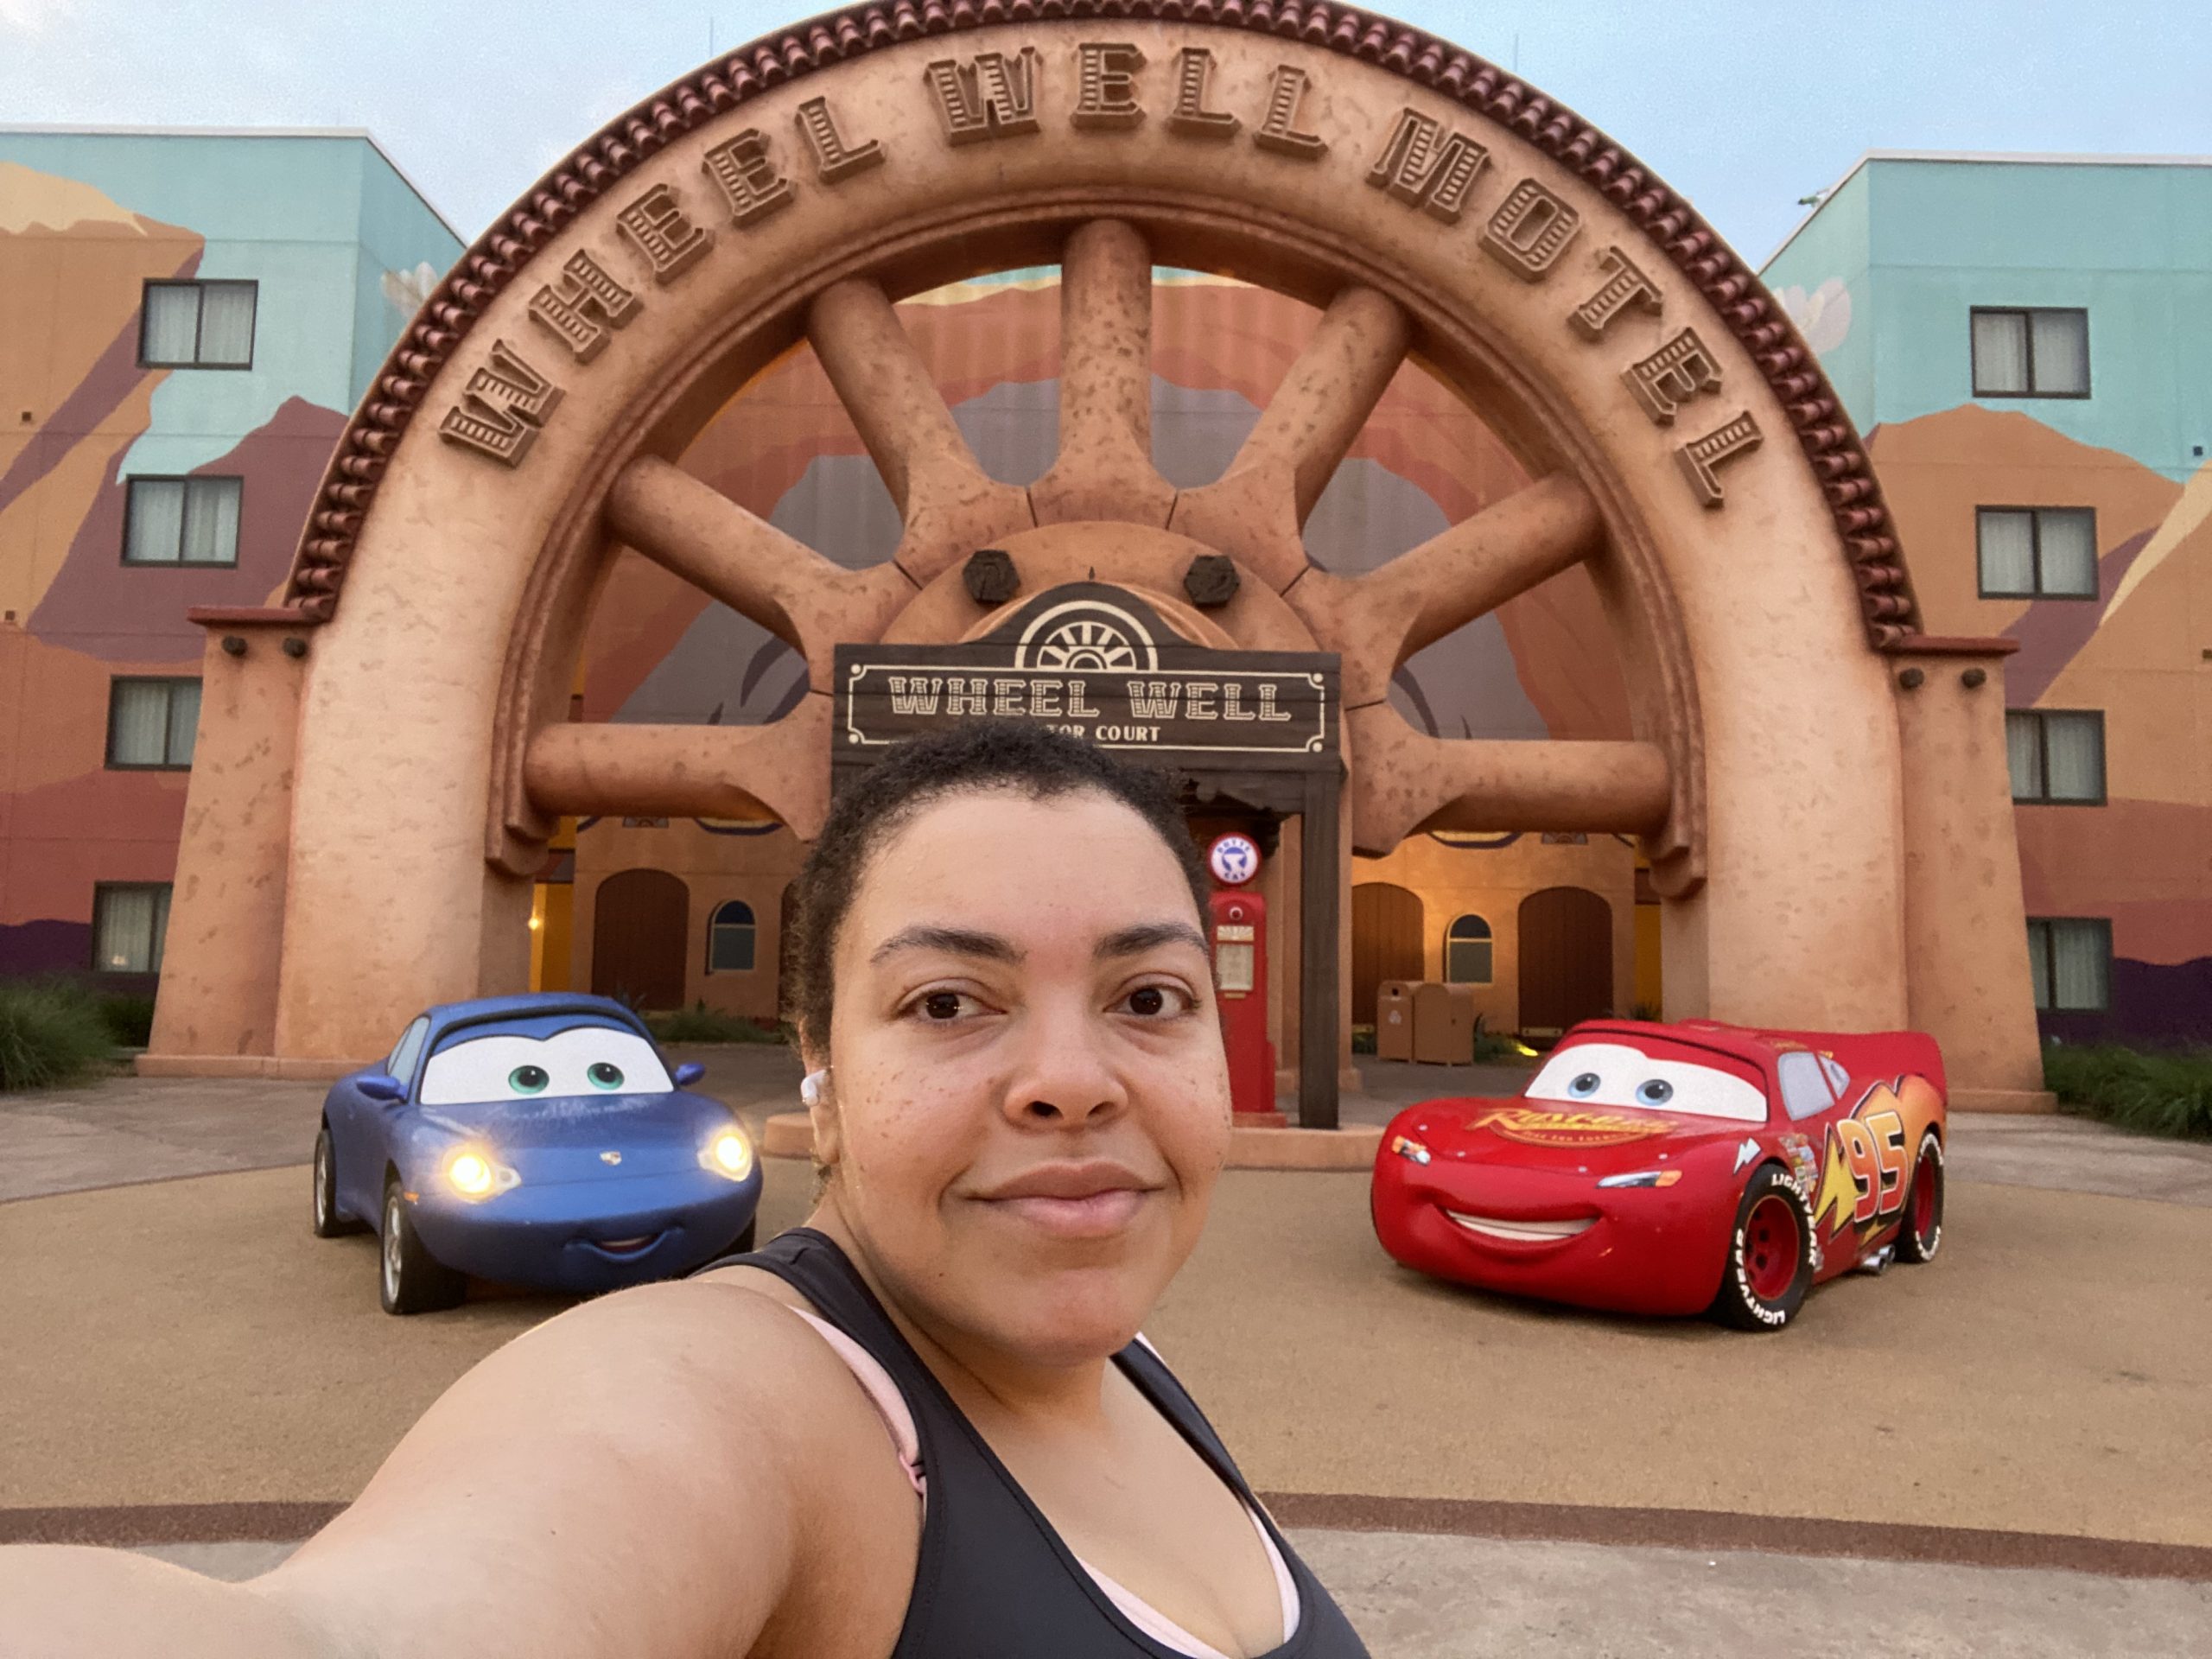 Woman poses in front of statues from the Pixar movie Cars